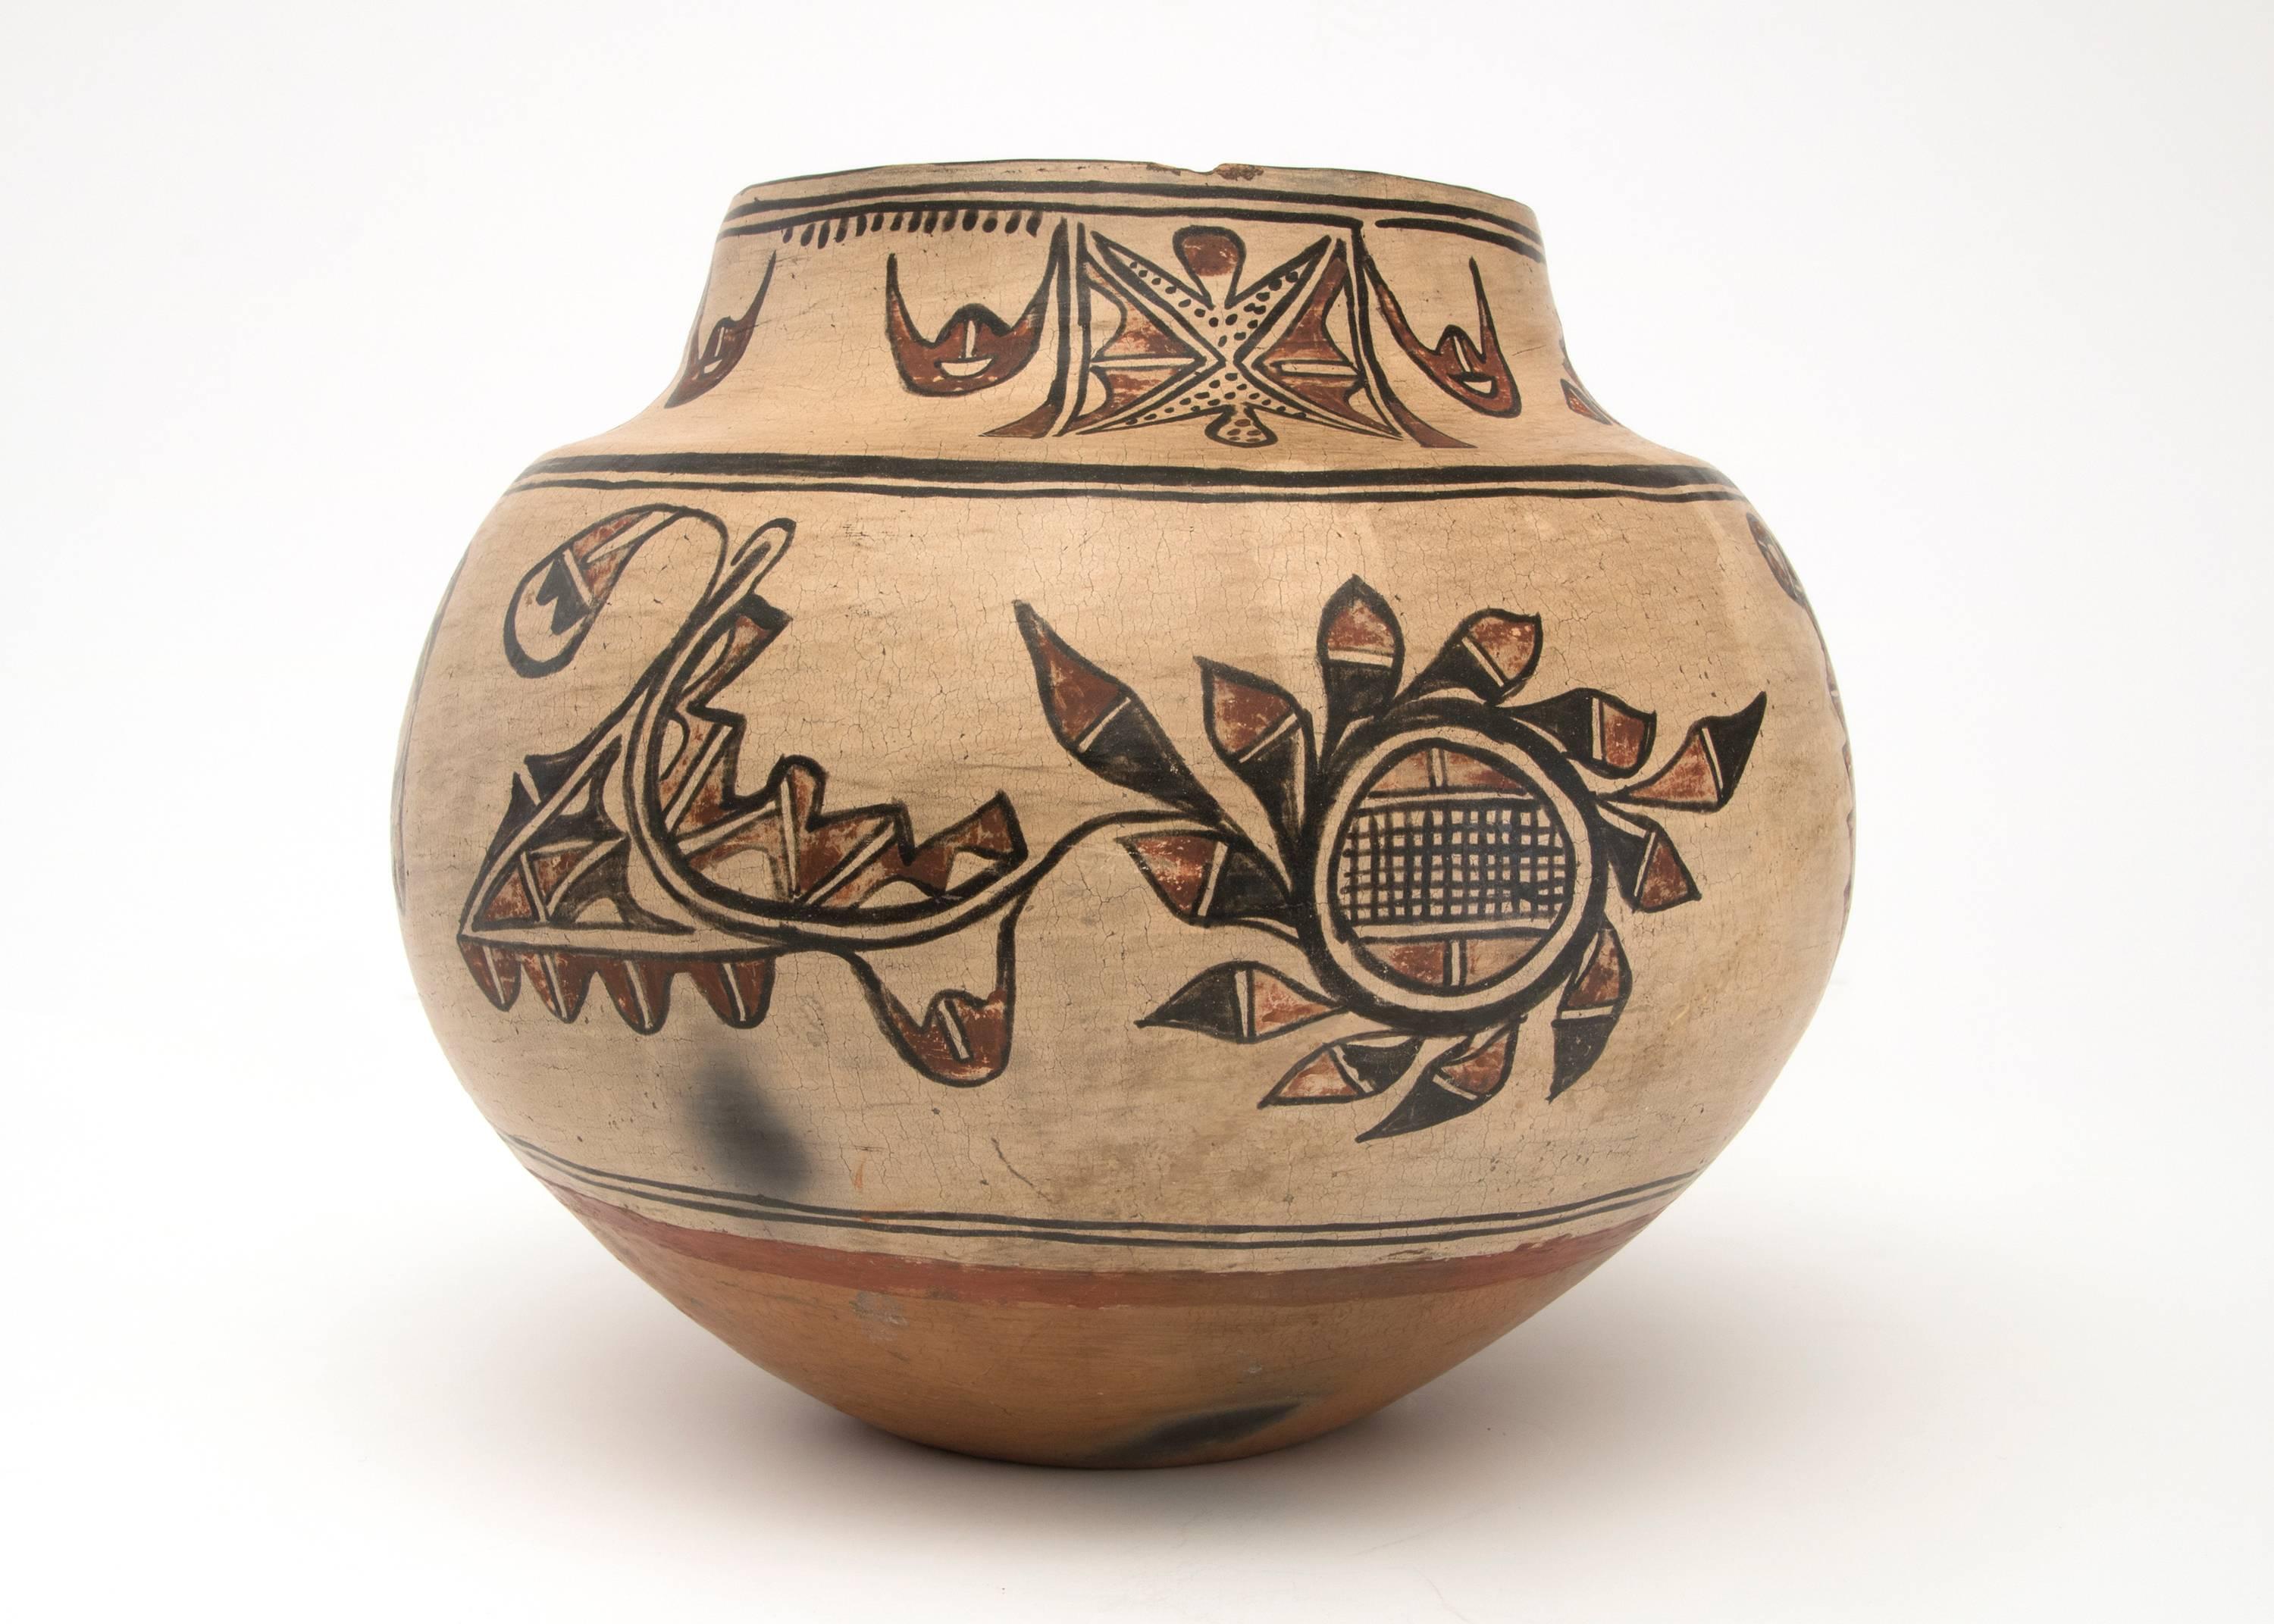 19th century Native American Southwestern Polychrome Pottery Jar created at San Ildefonso Pueblo in an olla form, circa 1875-1900. Constructed by hand and finely painted with slip glazes traditional designs. The Pueblo de San Ildefonso (